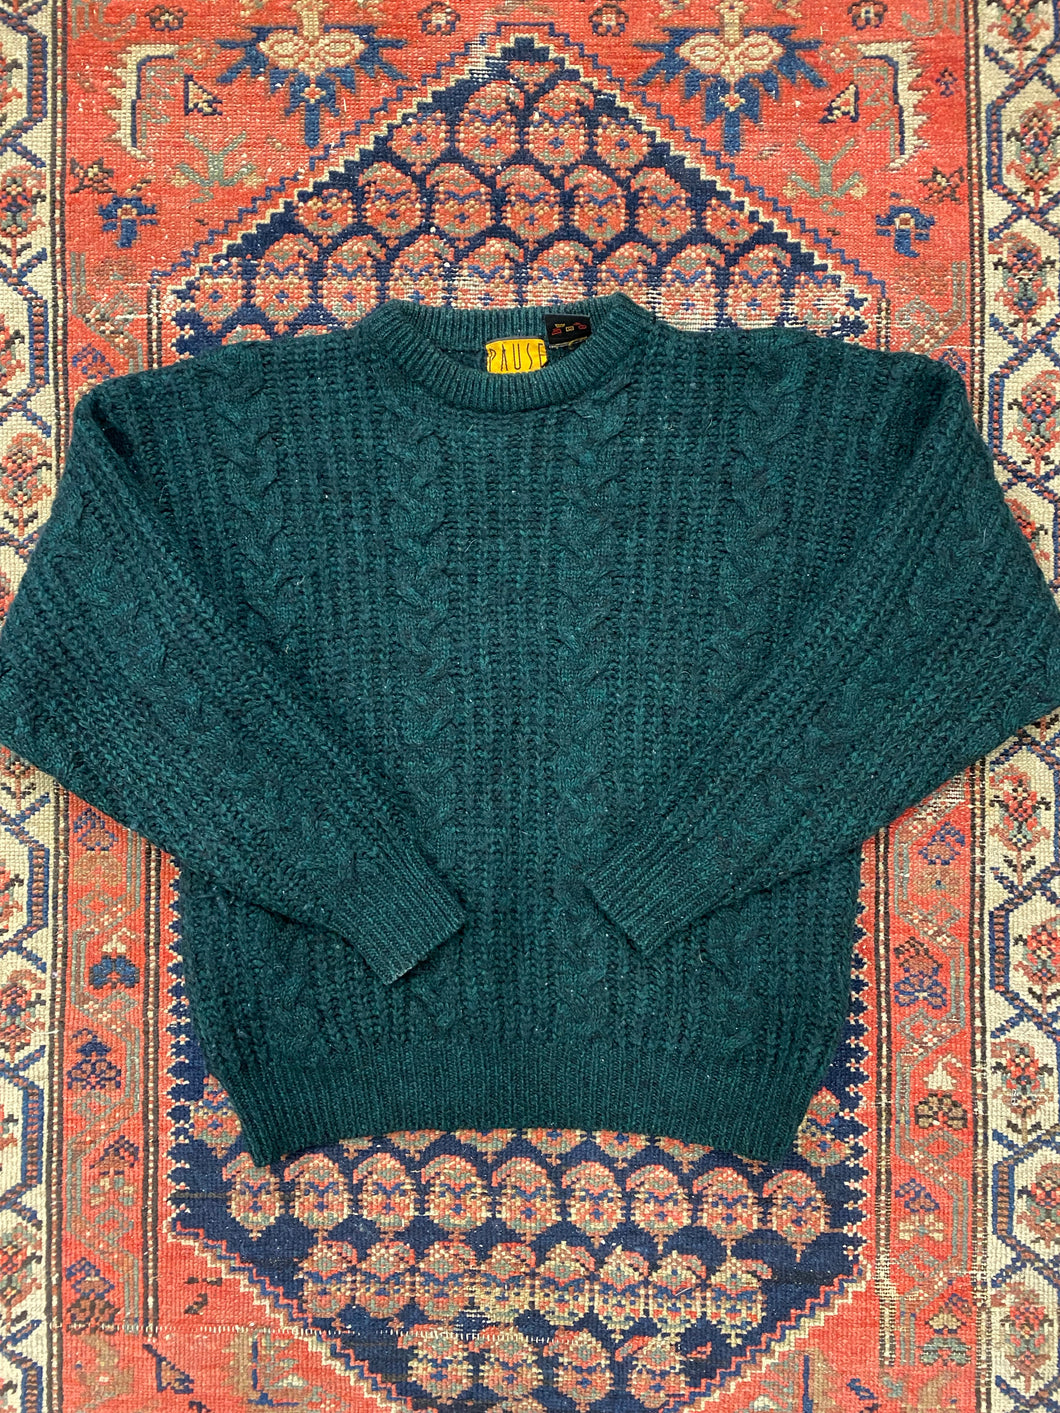 Vintage Green Cable Knit Sweater - S